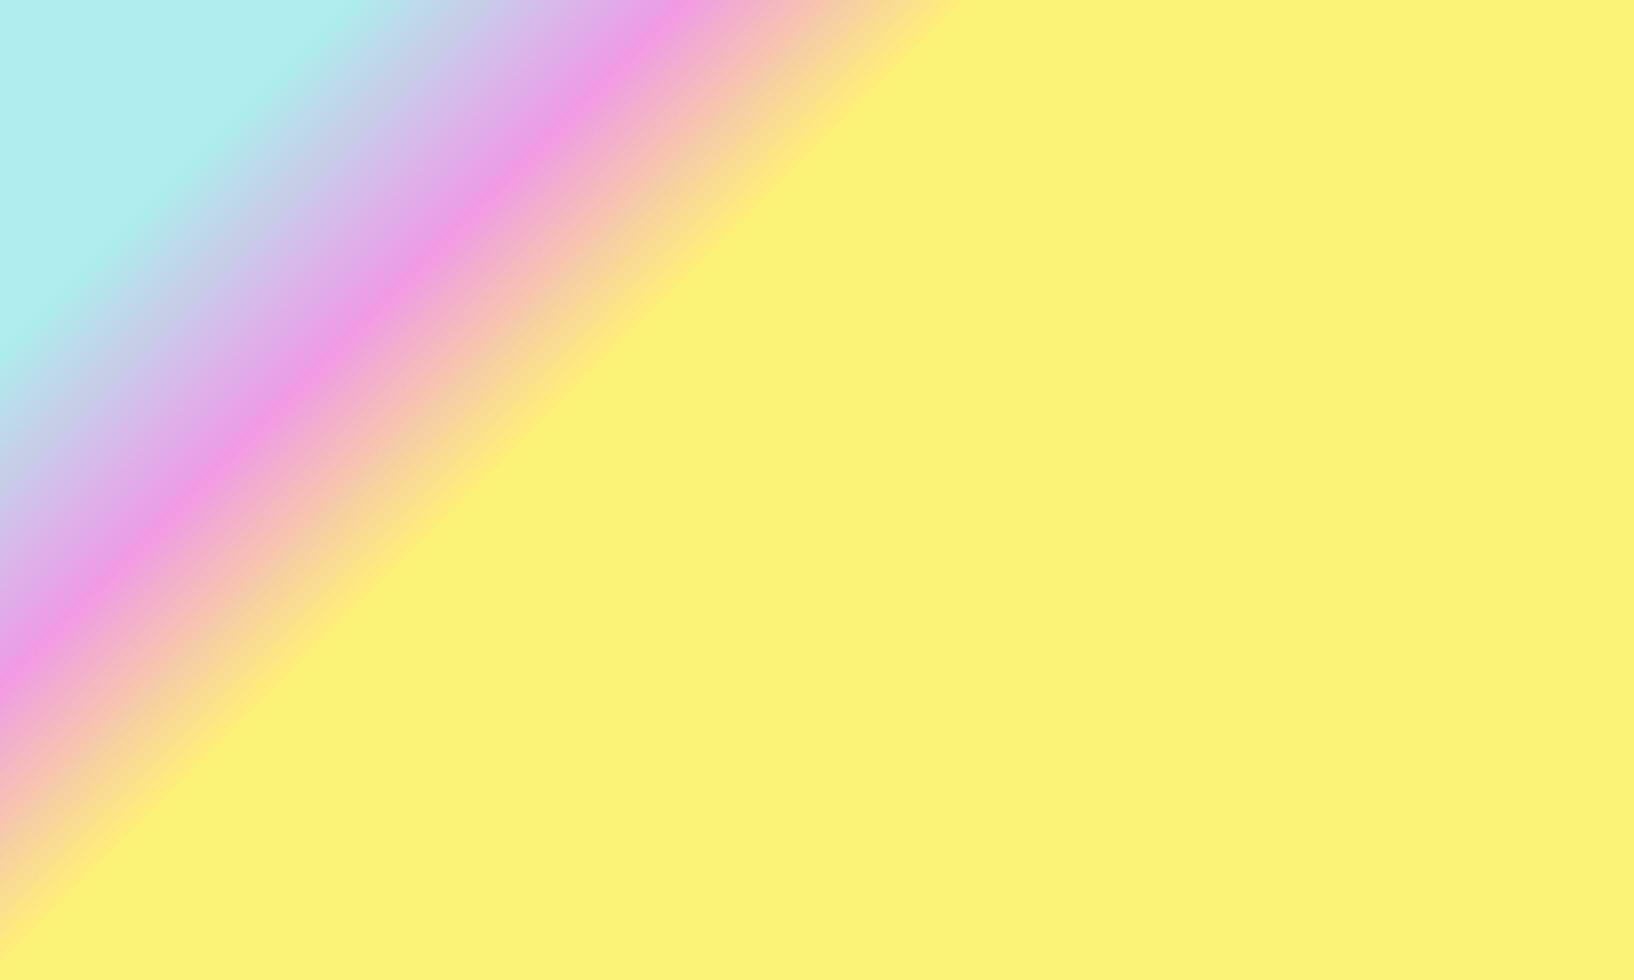 Design simple highlighter blue,yellow and pink gradient color illustration background photo